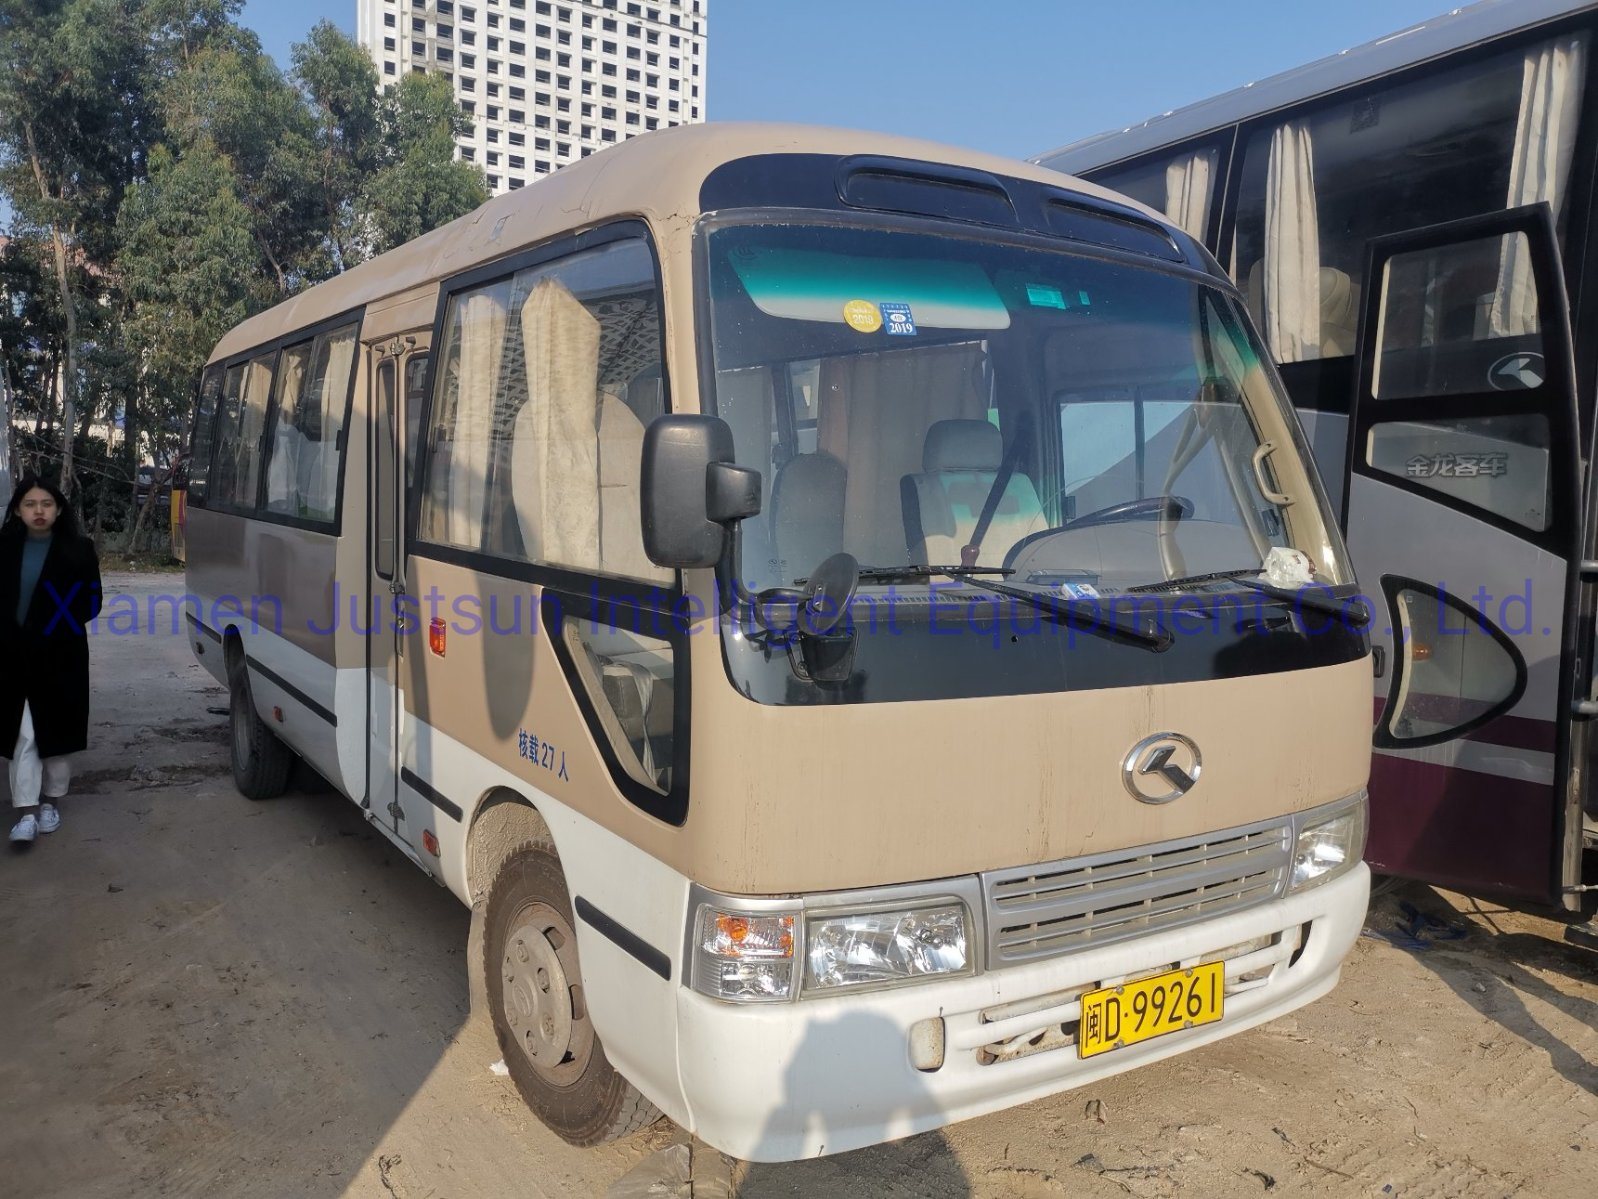 Used Tour Bus with 28 Seats